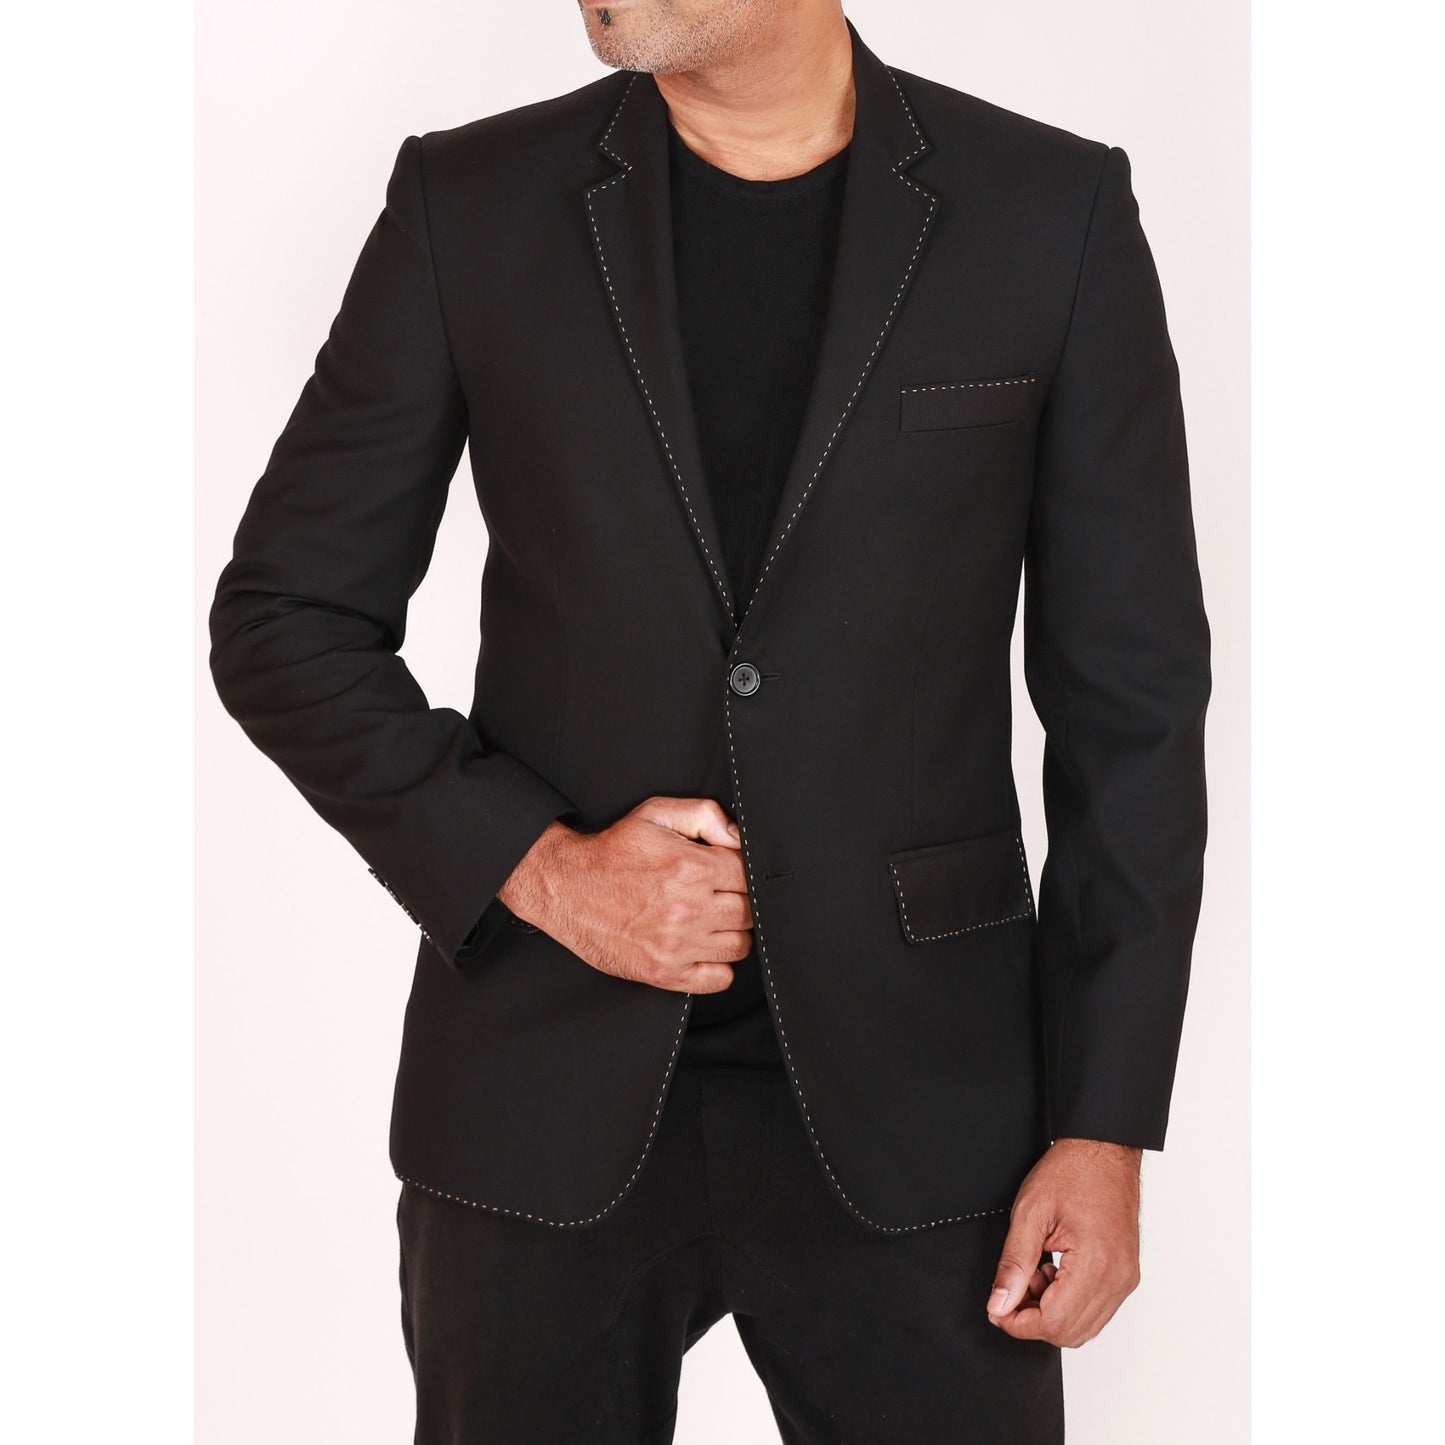 Single breasted jacket with handstitch detail at edges & slimfit flatfront trousers